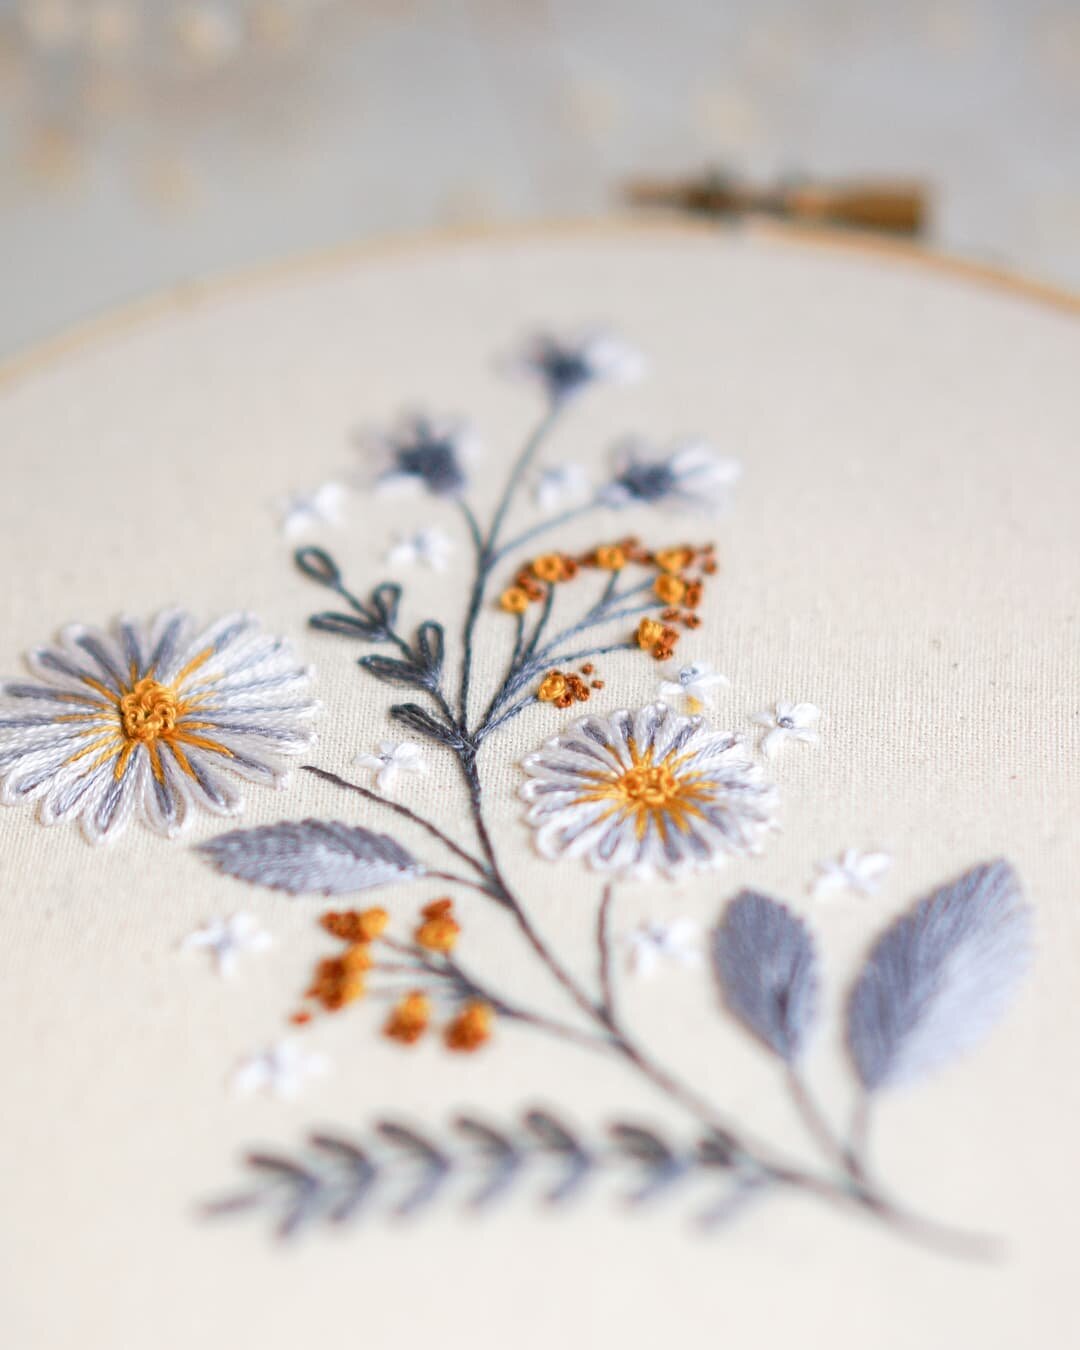 Silver asters - both pattern and kit available at www.sometimeinspring.com
.
.
.
.
#handembroidery #bordados #hoopart #britishstitchers #diyembroidery #embroideryart #slowcraft #handmadeembroidery #embroideredtreasures #crafternoon #embroiderykit #fl